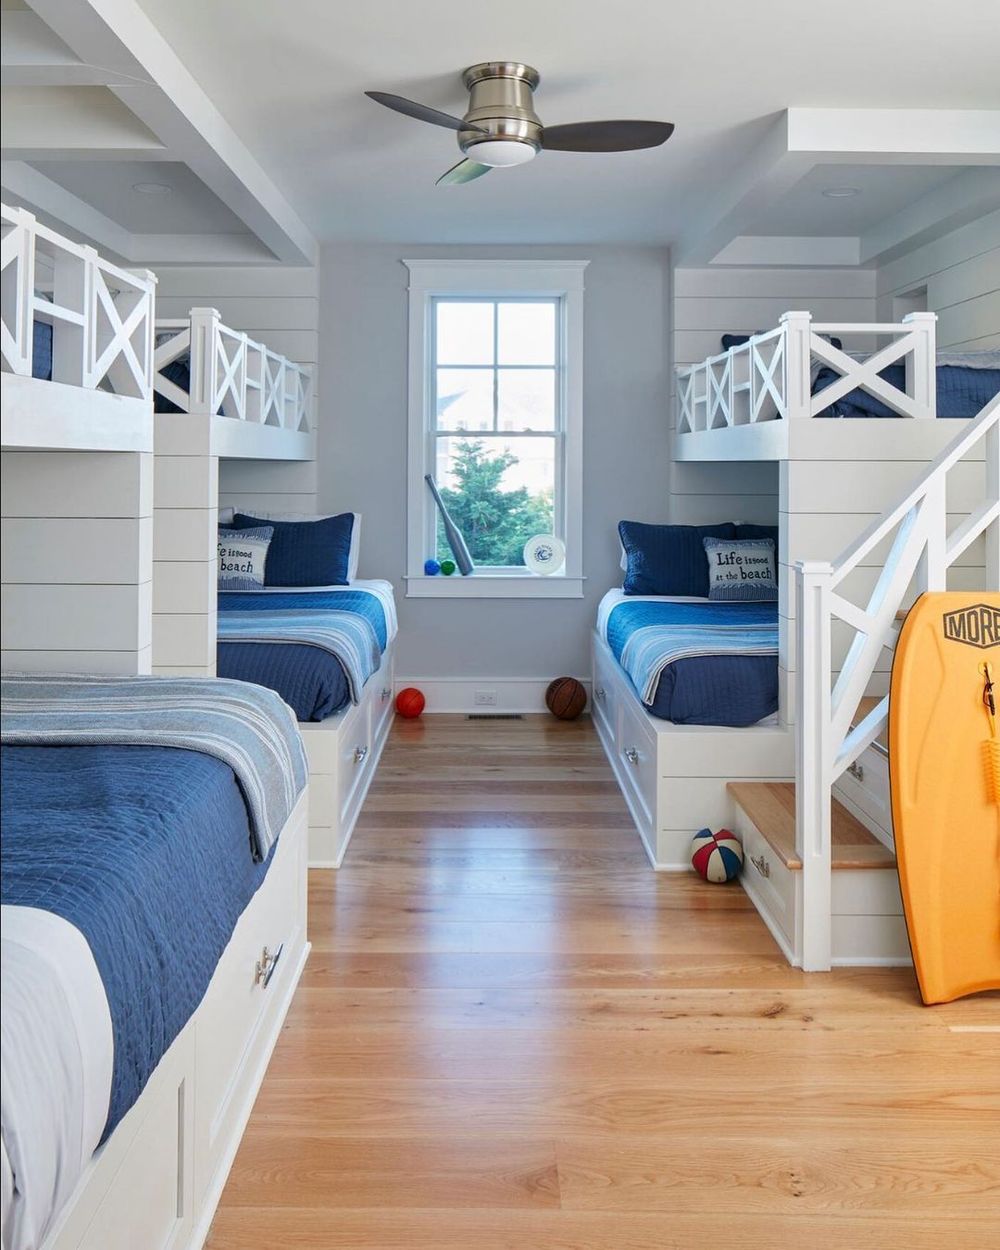 Nautical Bedroom design Ideas White Bunkbeds and shiplap walls @marnieoursler